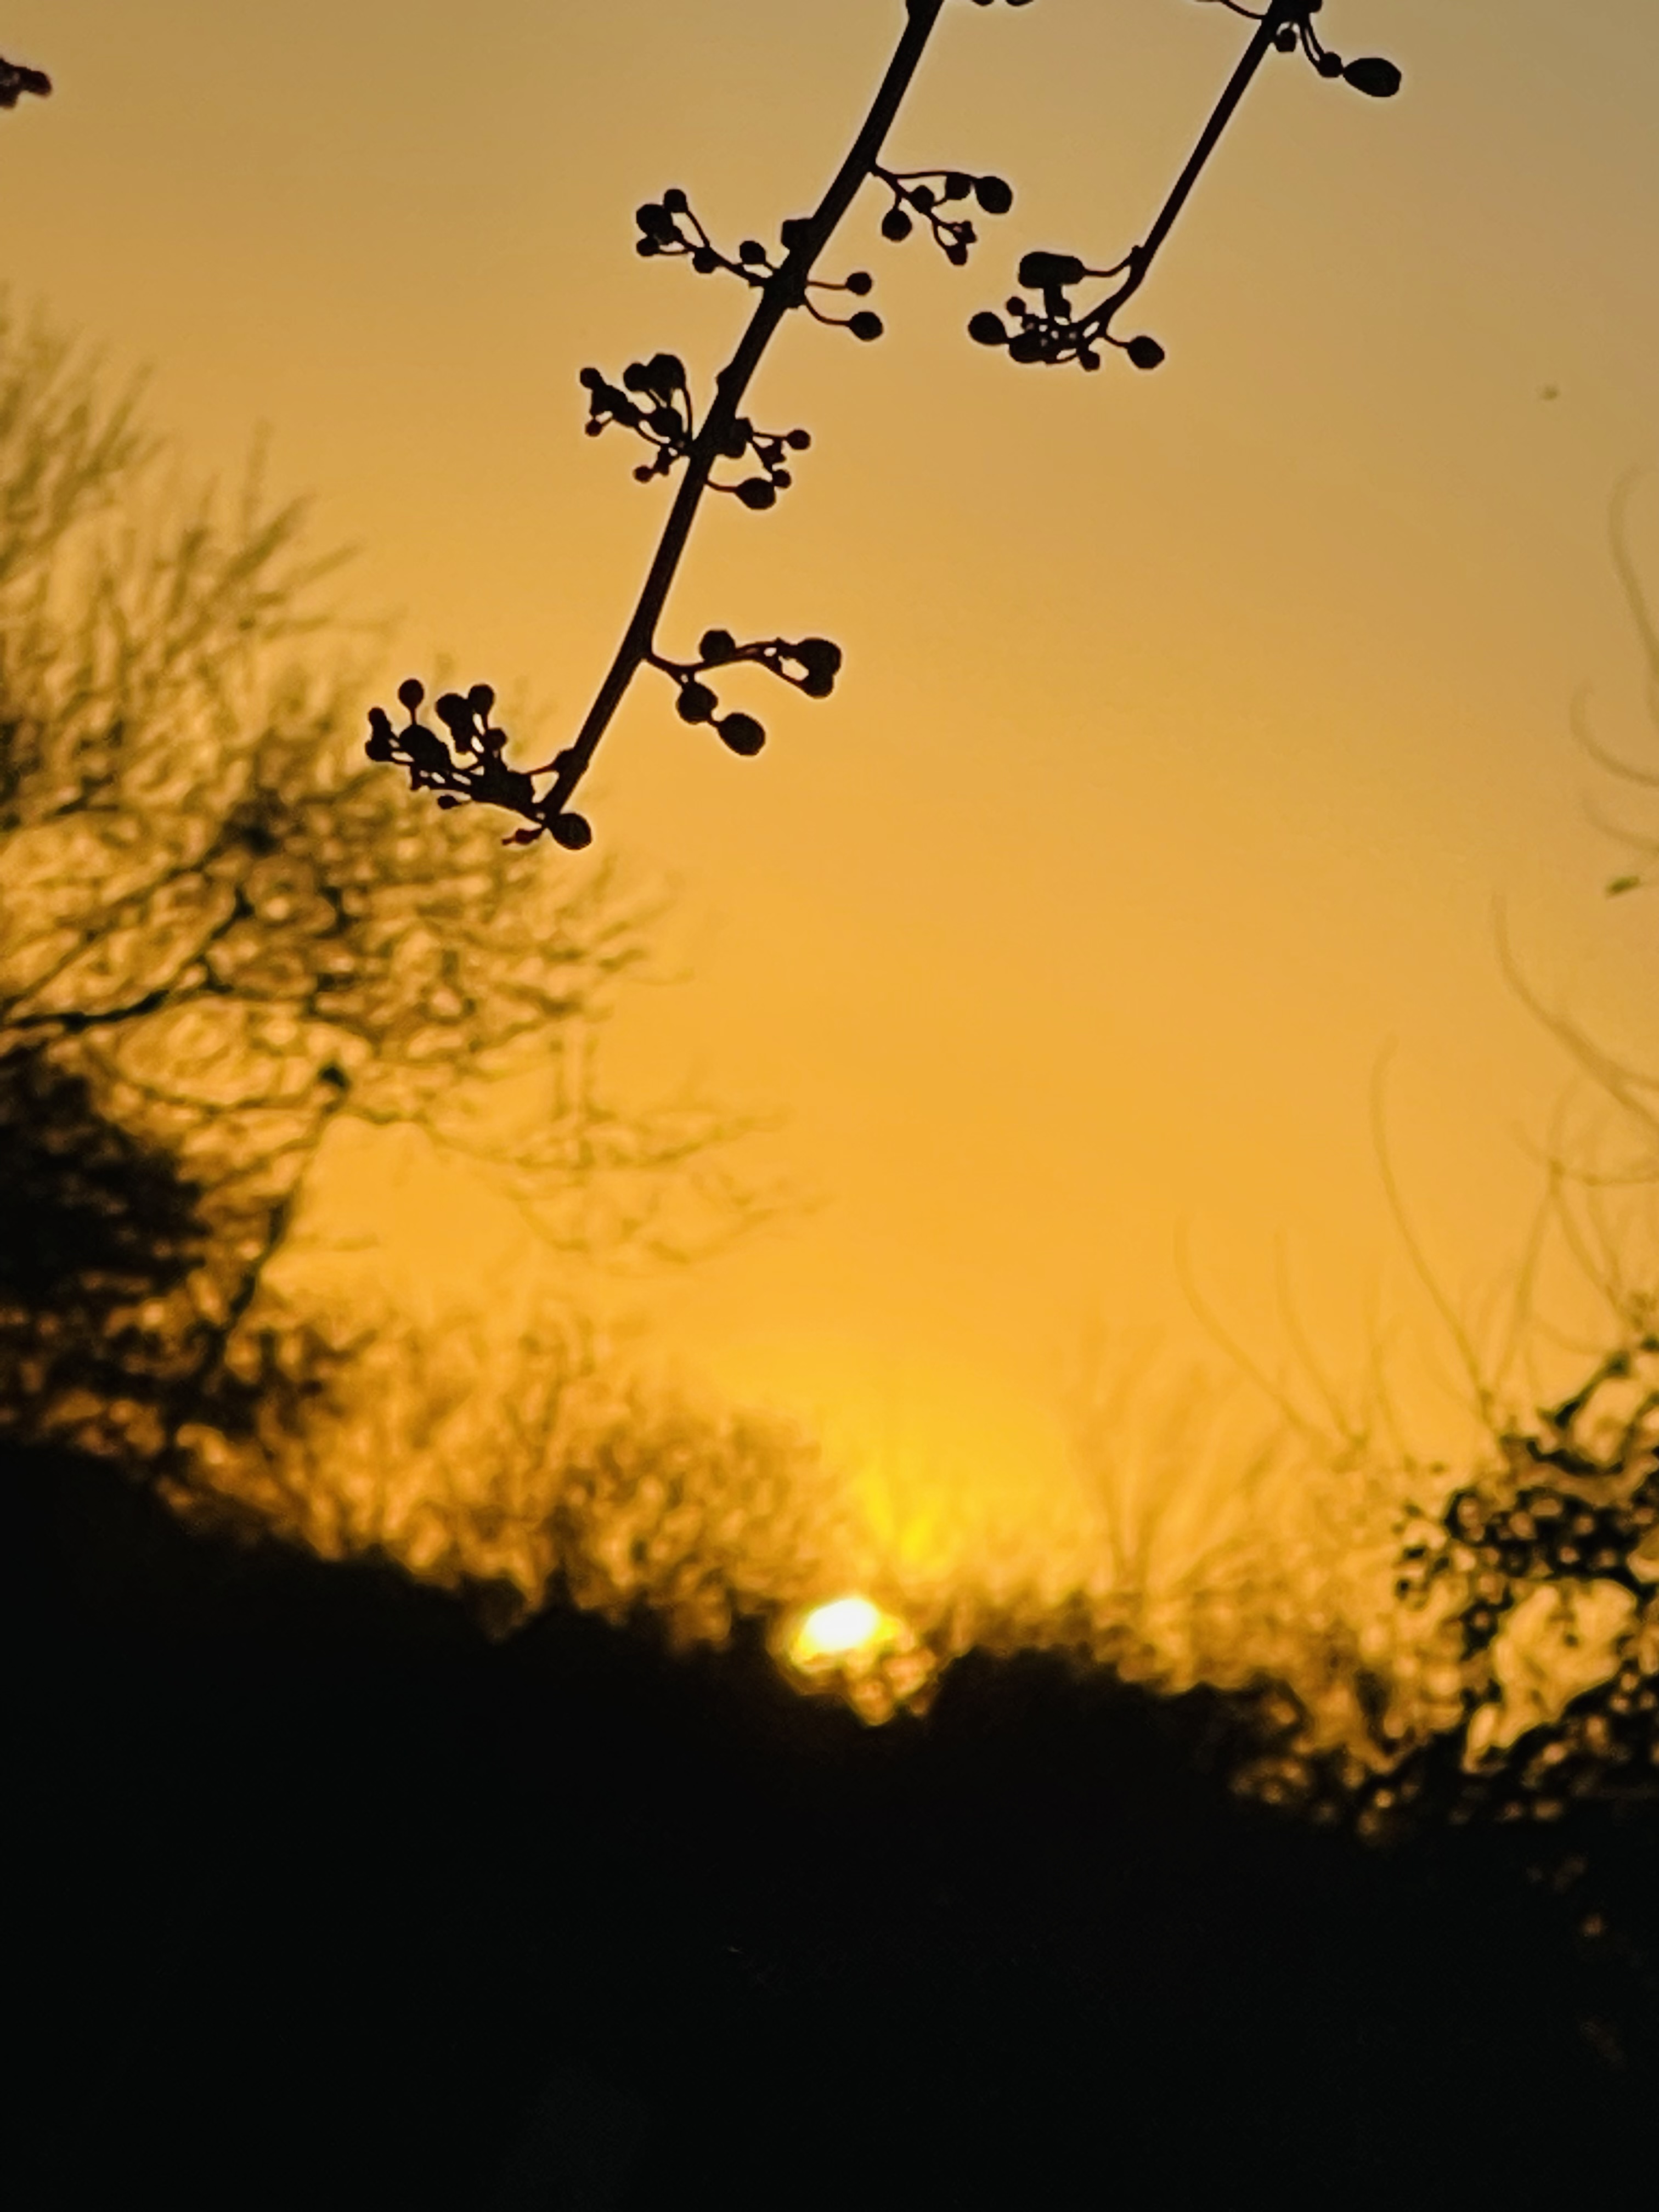 Photo by Riyansh Guntuka  |  Two tree branches on a sunset background 
Location: Veterans Oasis Park